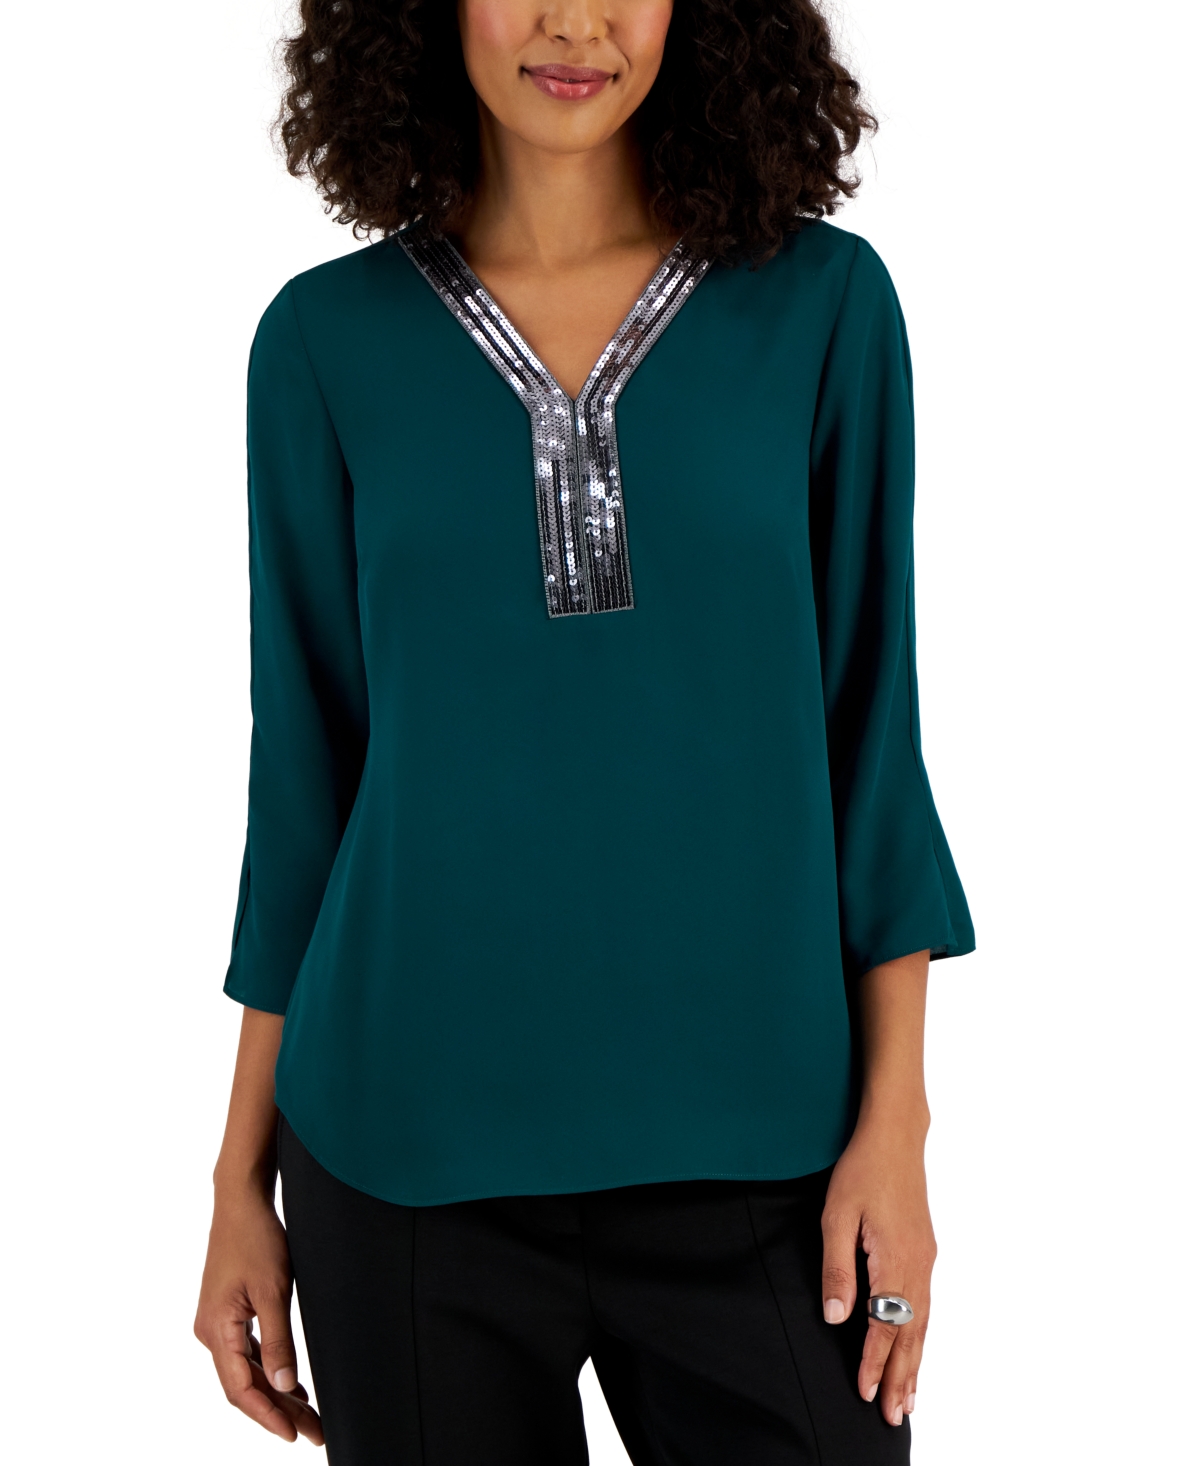 JM COLLECTION WOMEN'S SEQUIN-TRIM 3/4-SLEEVE TUNIC, CREATED FOR MACY'S